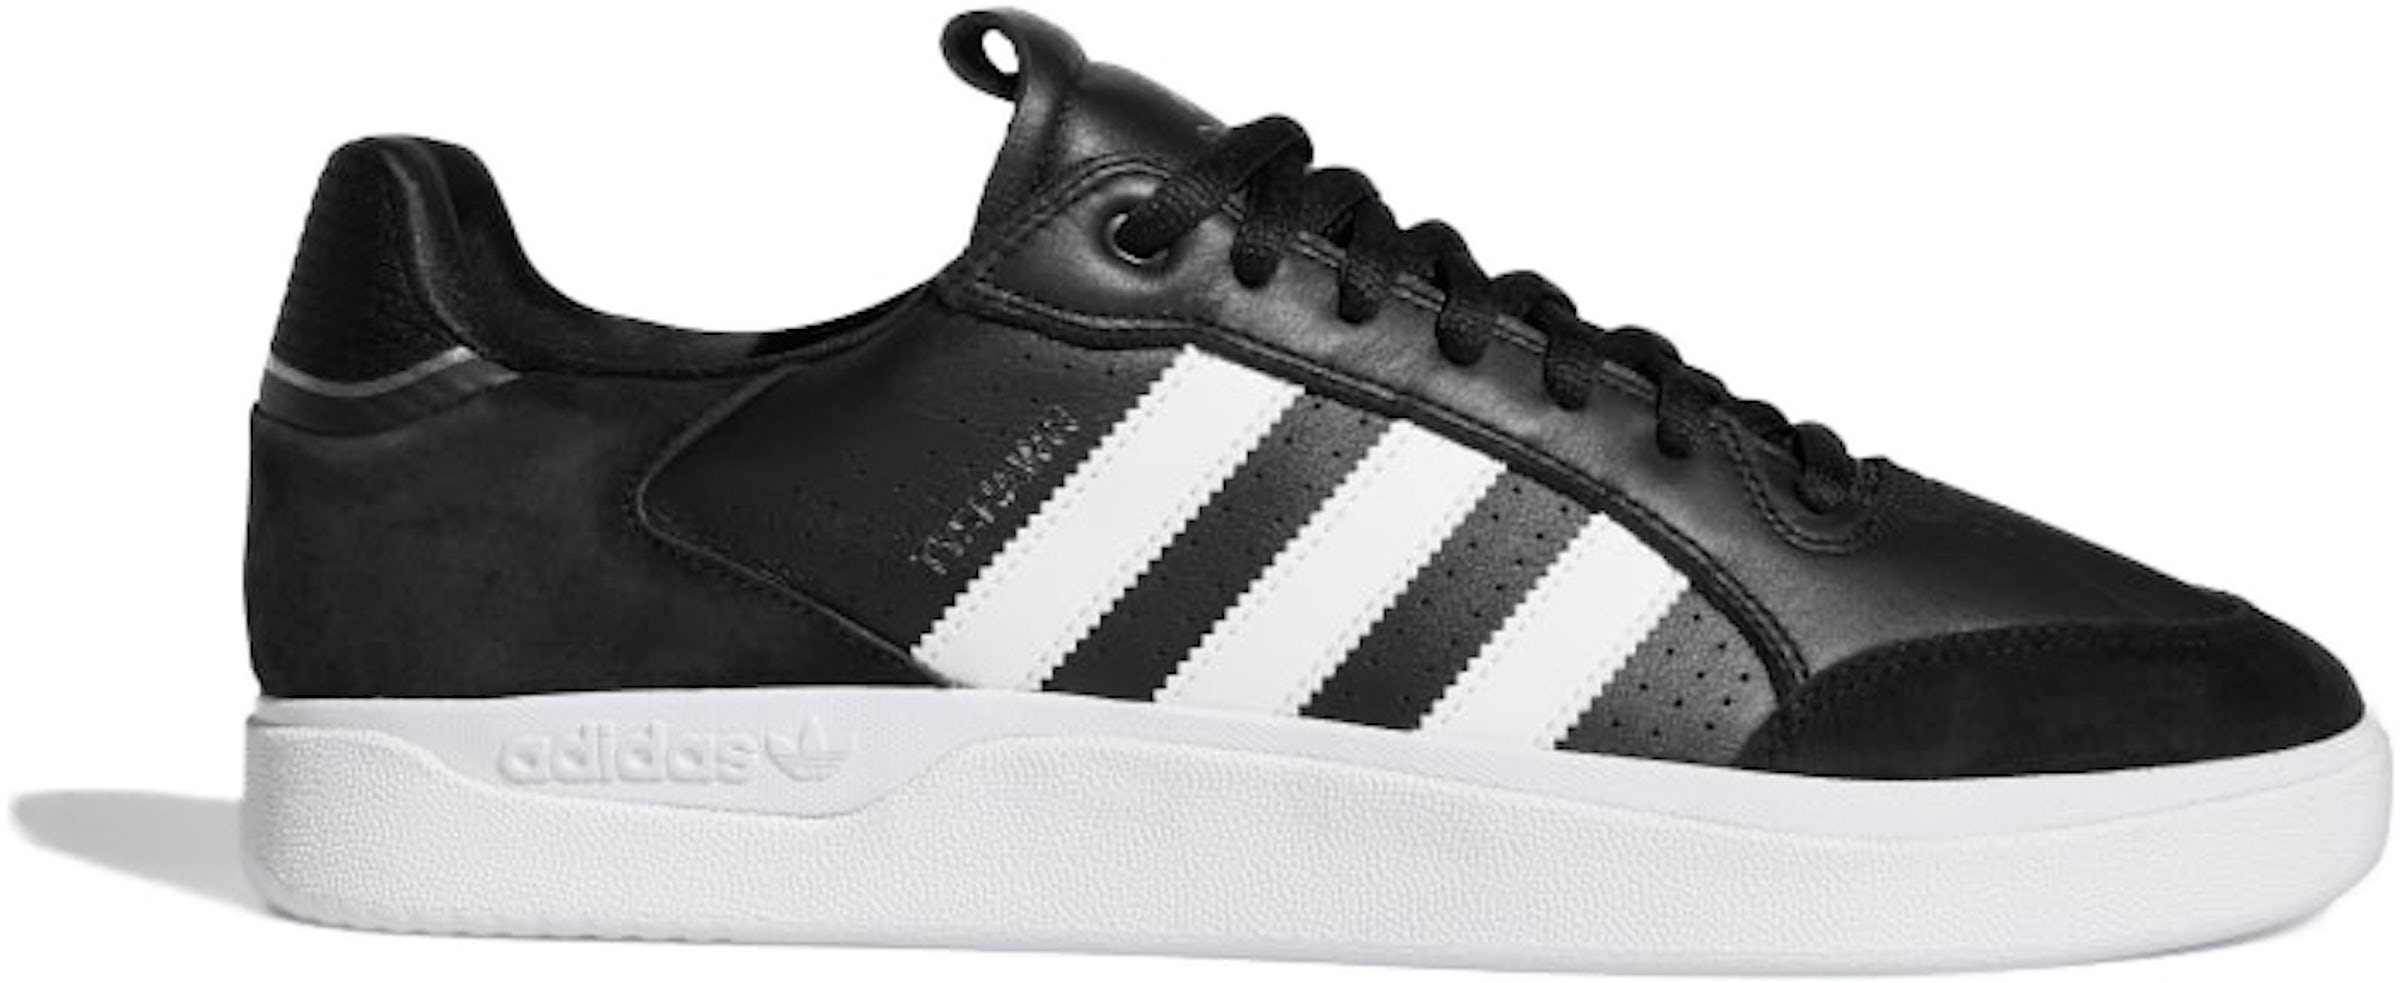 Size New Buy & Sneakers Skateboarding 4.5 - StockX adidas Shoes